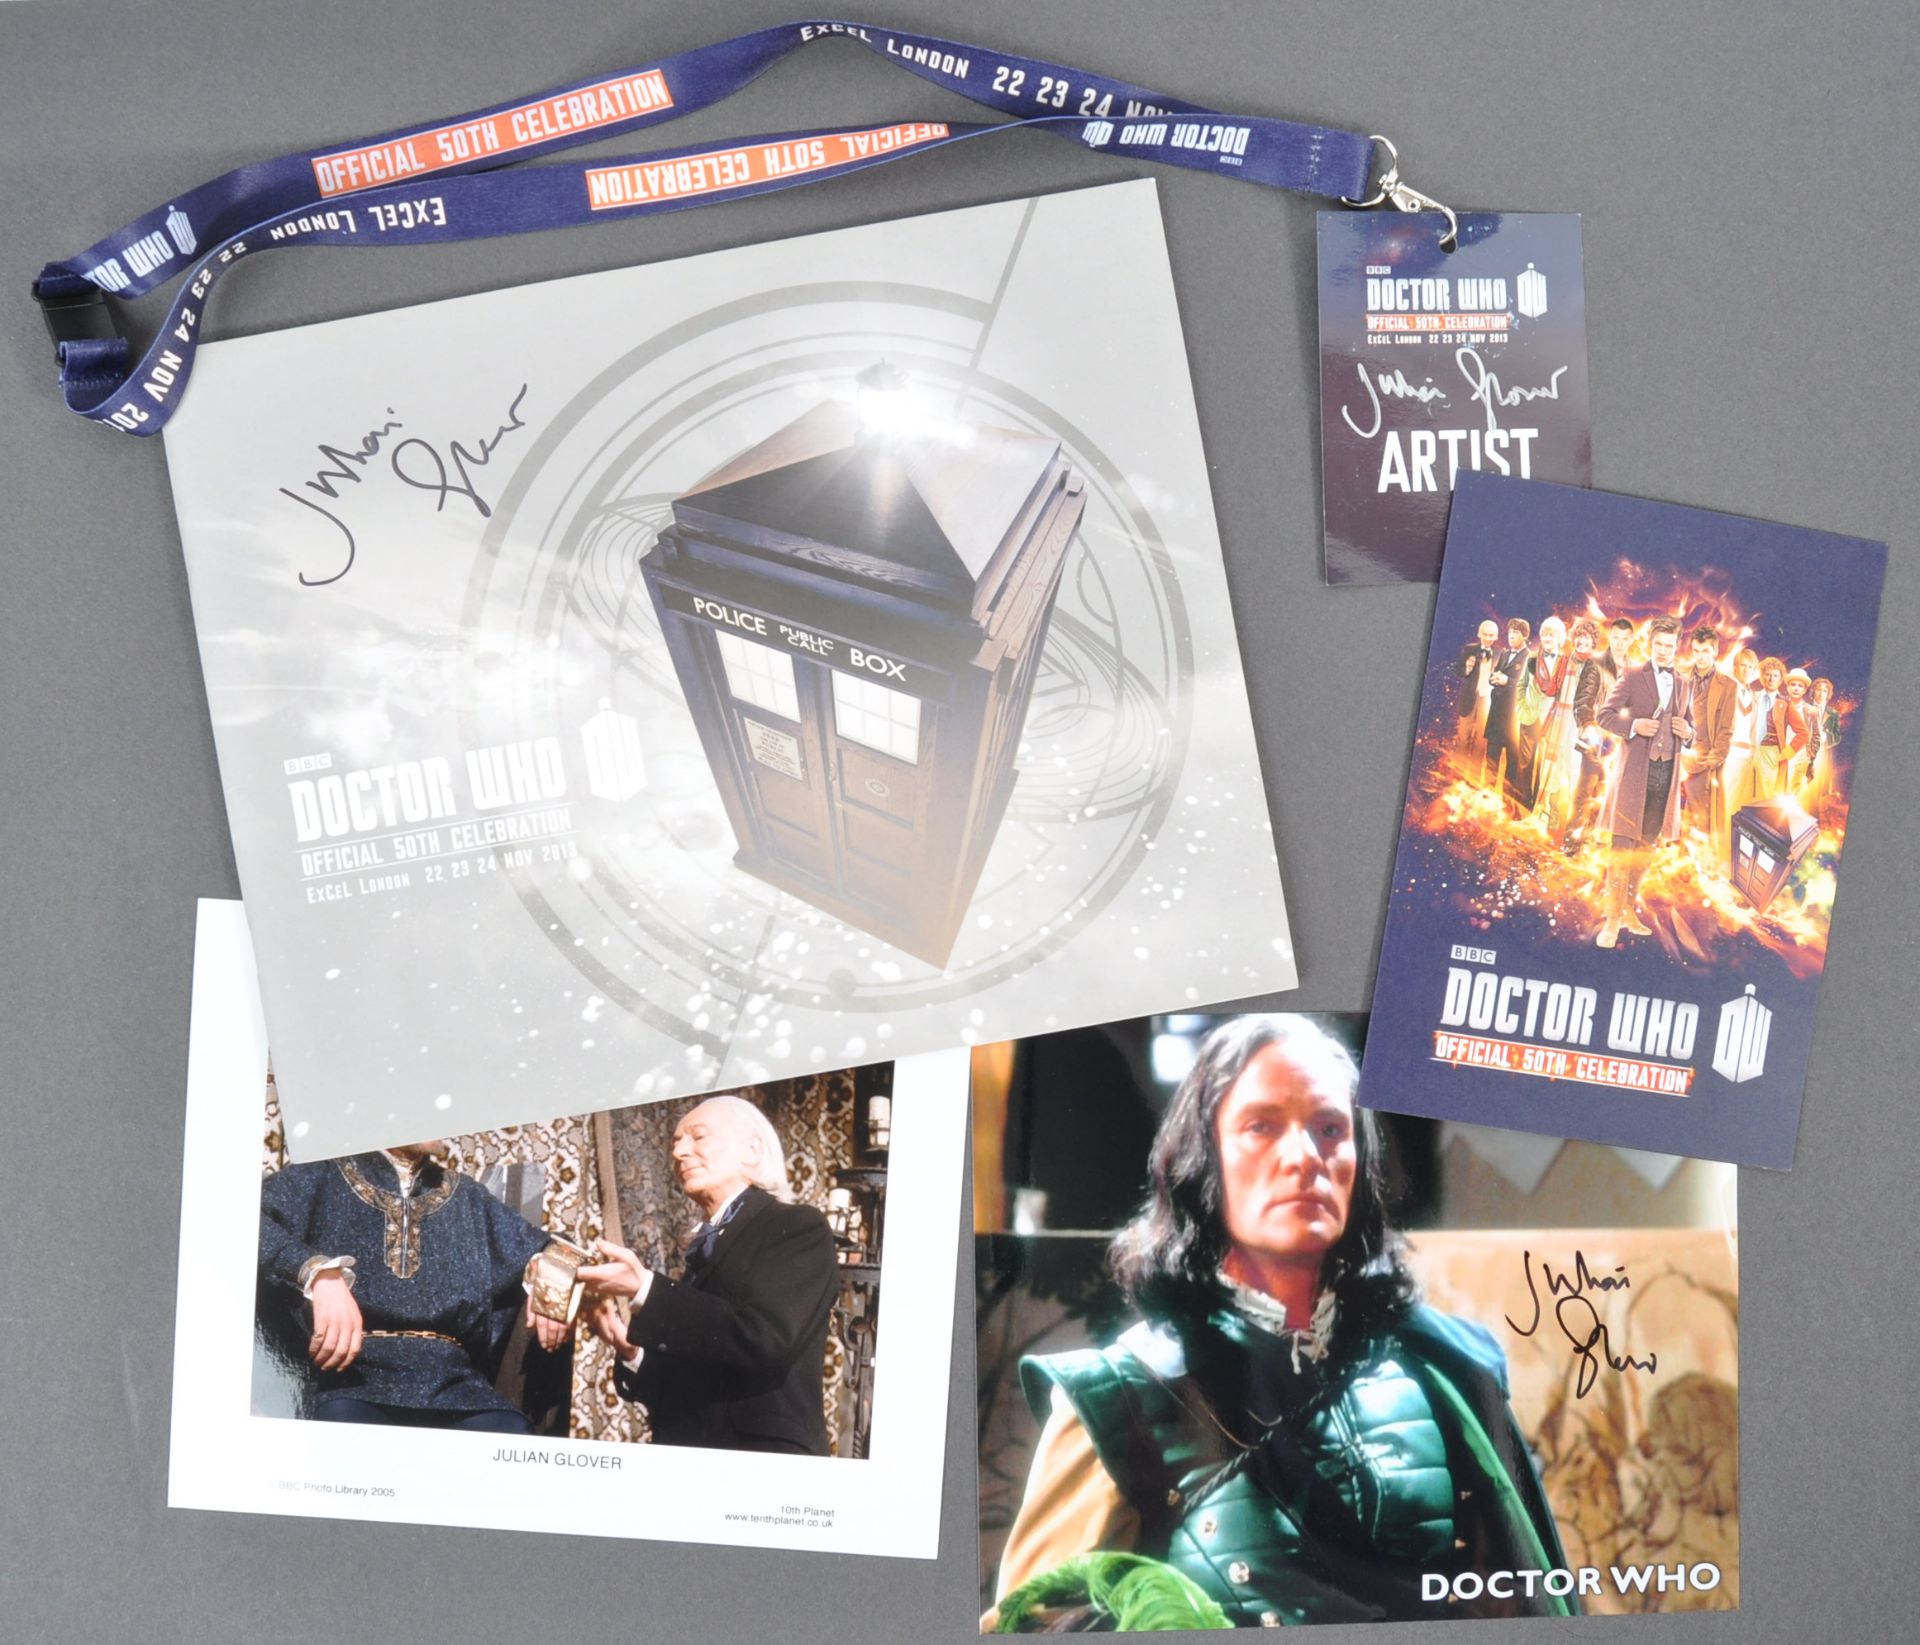 DOCTOR WHO 50TH ANNIVERSARY CELEBRATION - GLOVER'S PERSONAL BROCHURE